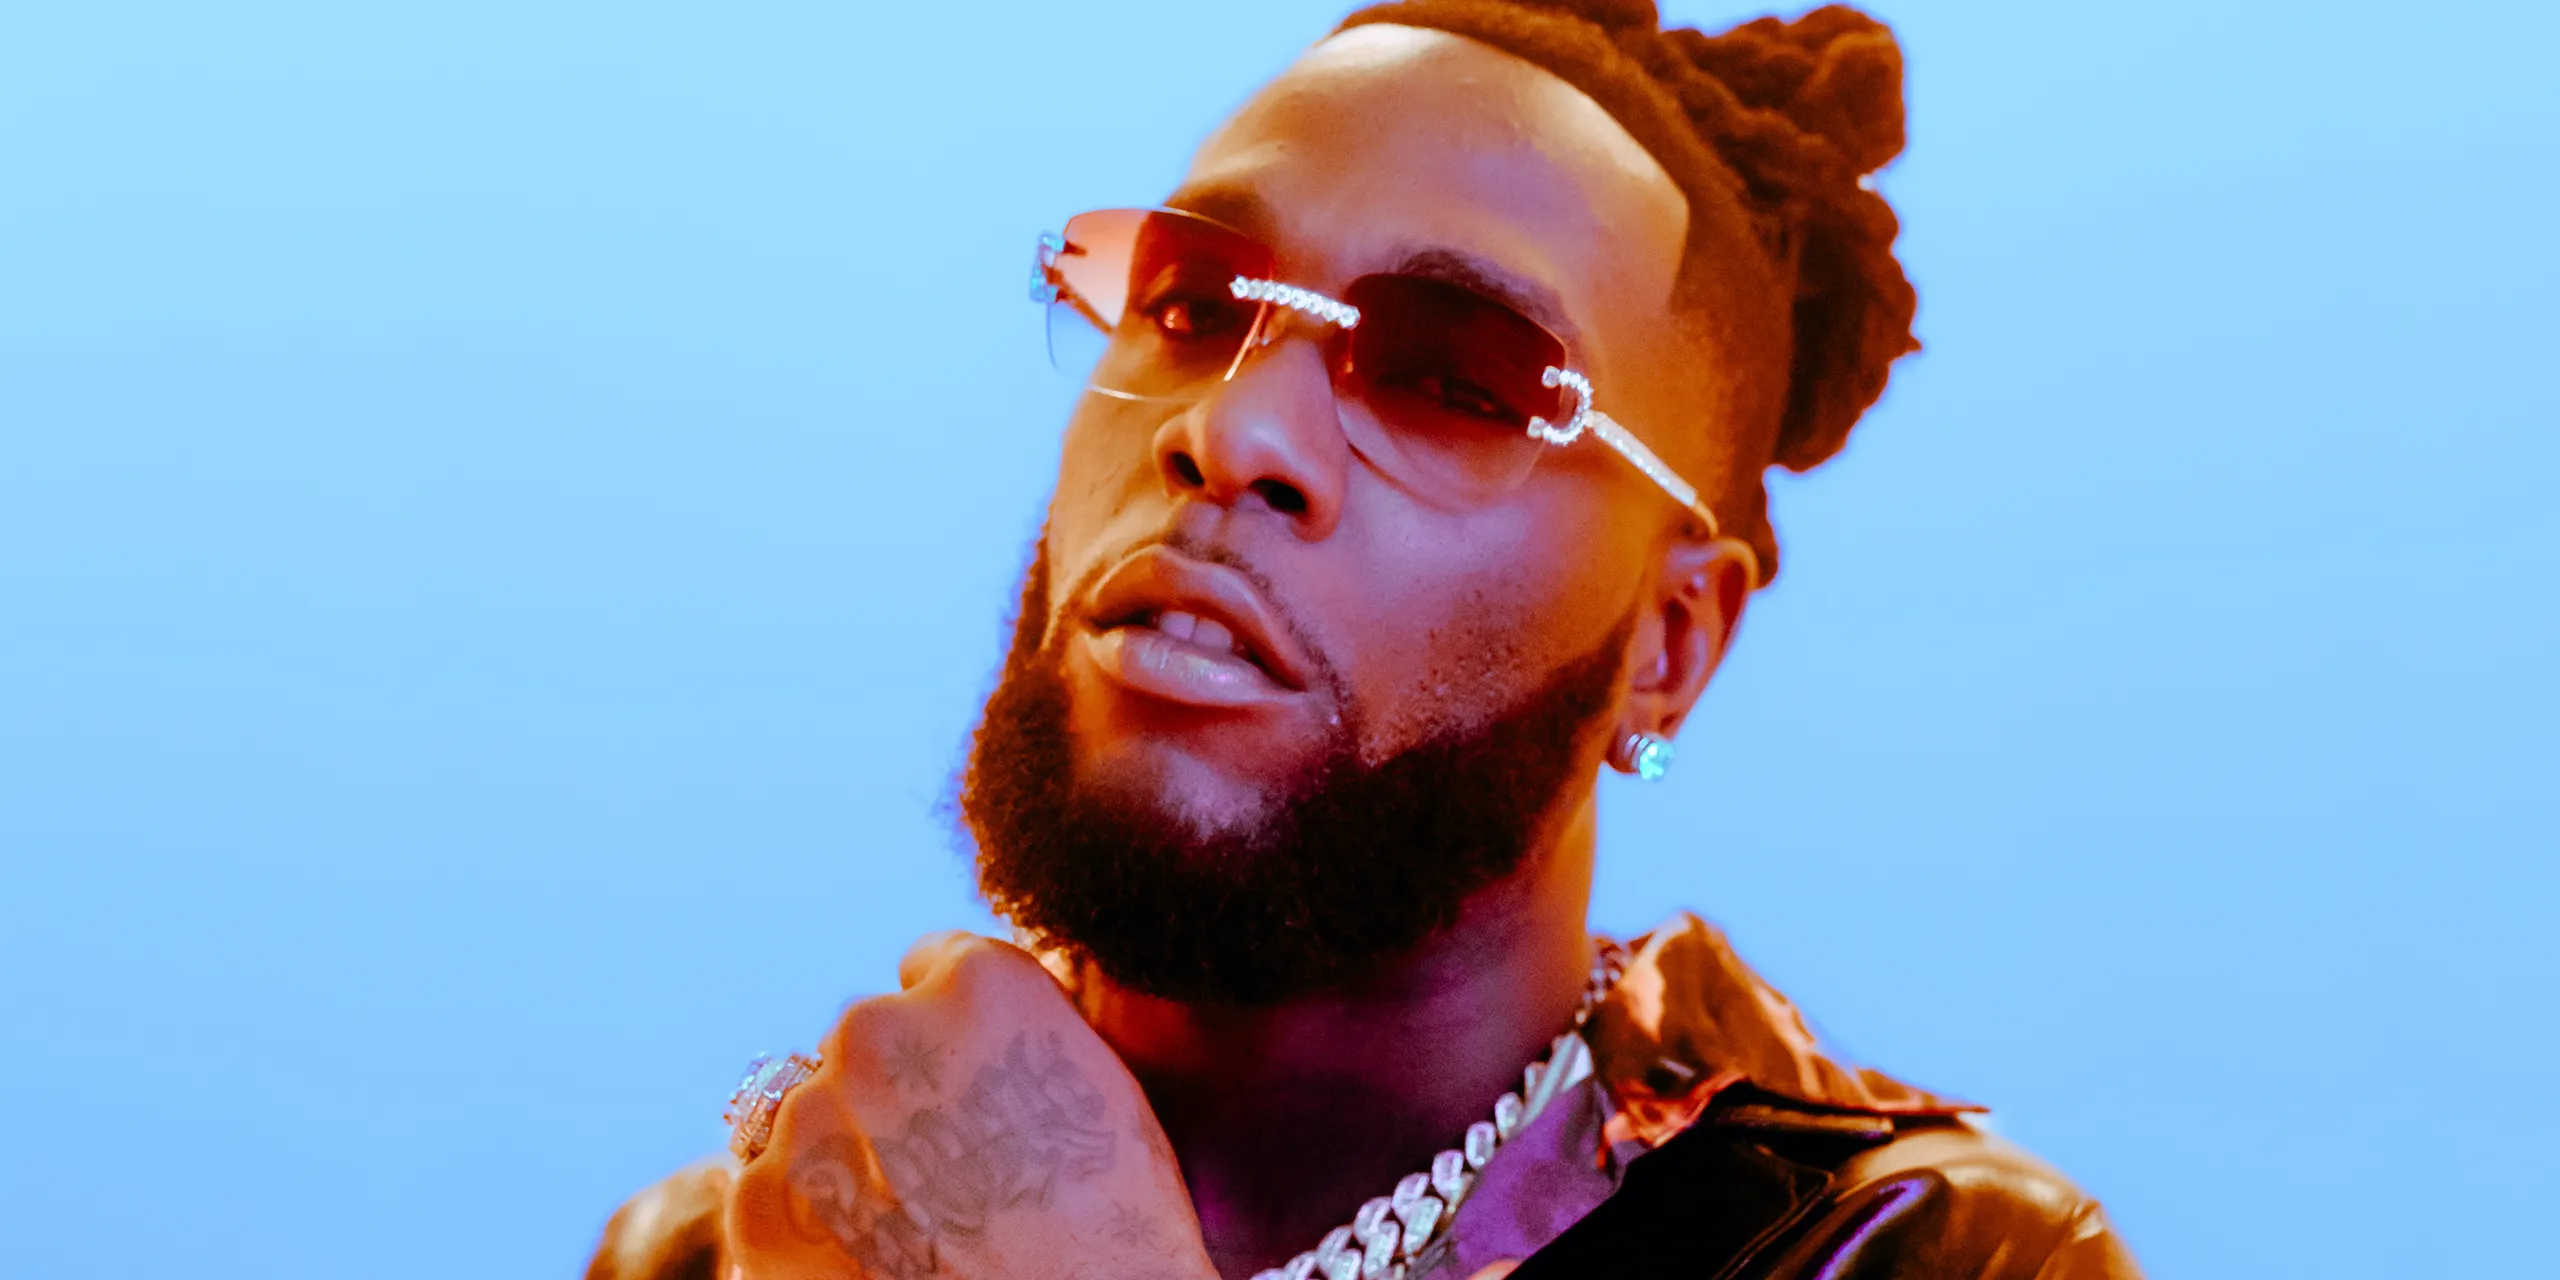 Burna Boy Tweets About His Upcoming Documentary